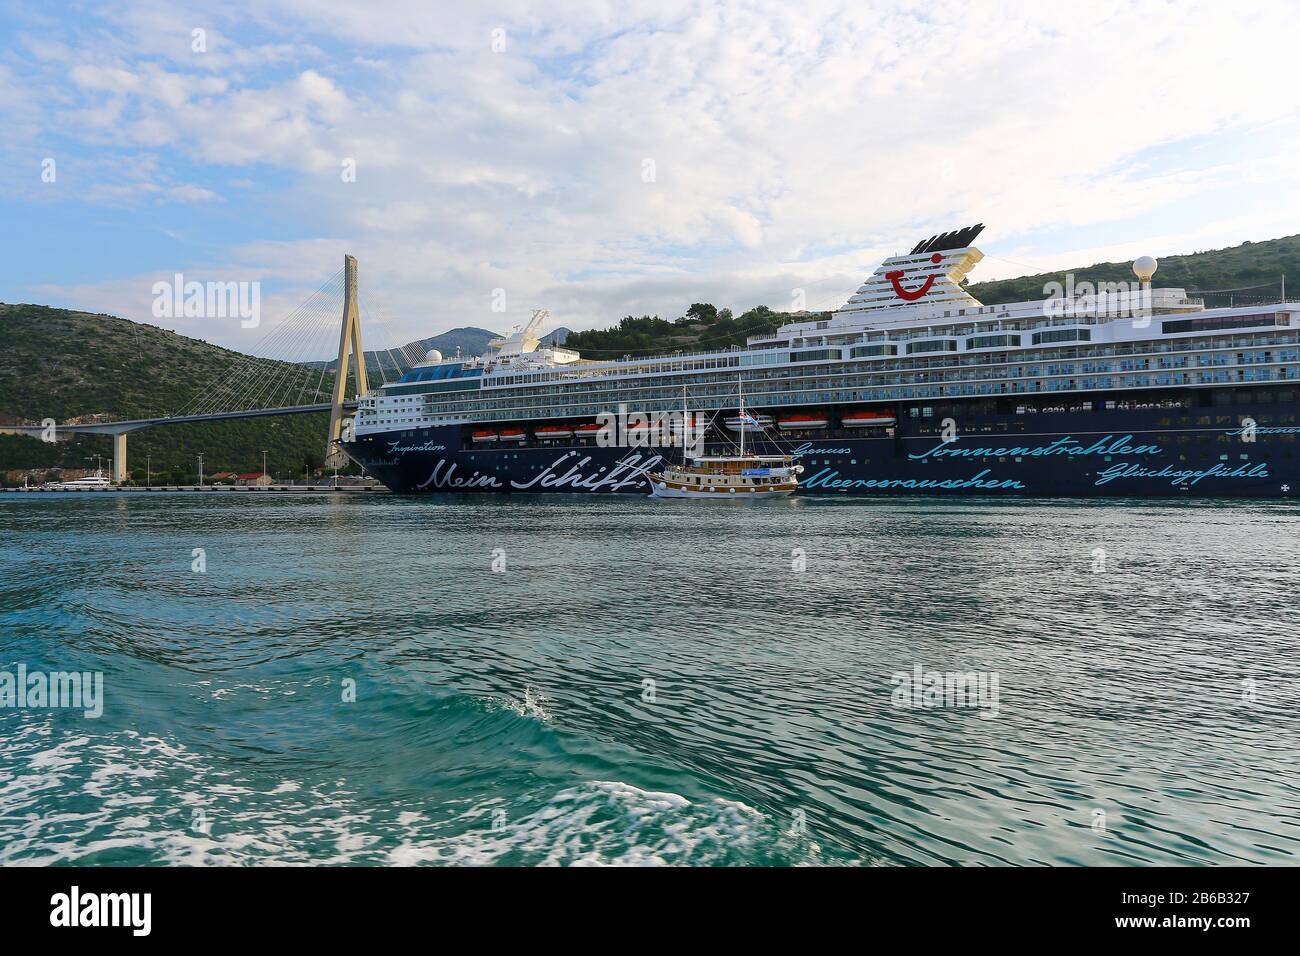 The TUI Cruises cruise ship Mein Schiff 2 moored up near the suspension bridge with an older sailing ship going past at Dubrovnik, Croatia Stock Photo